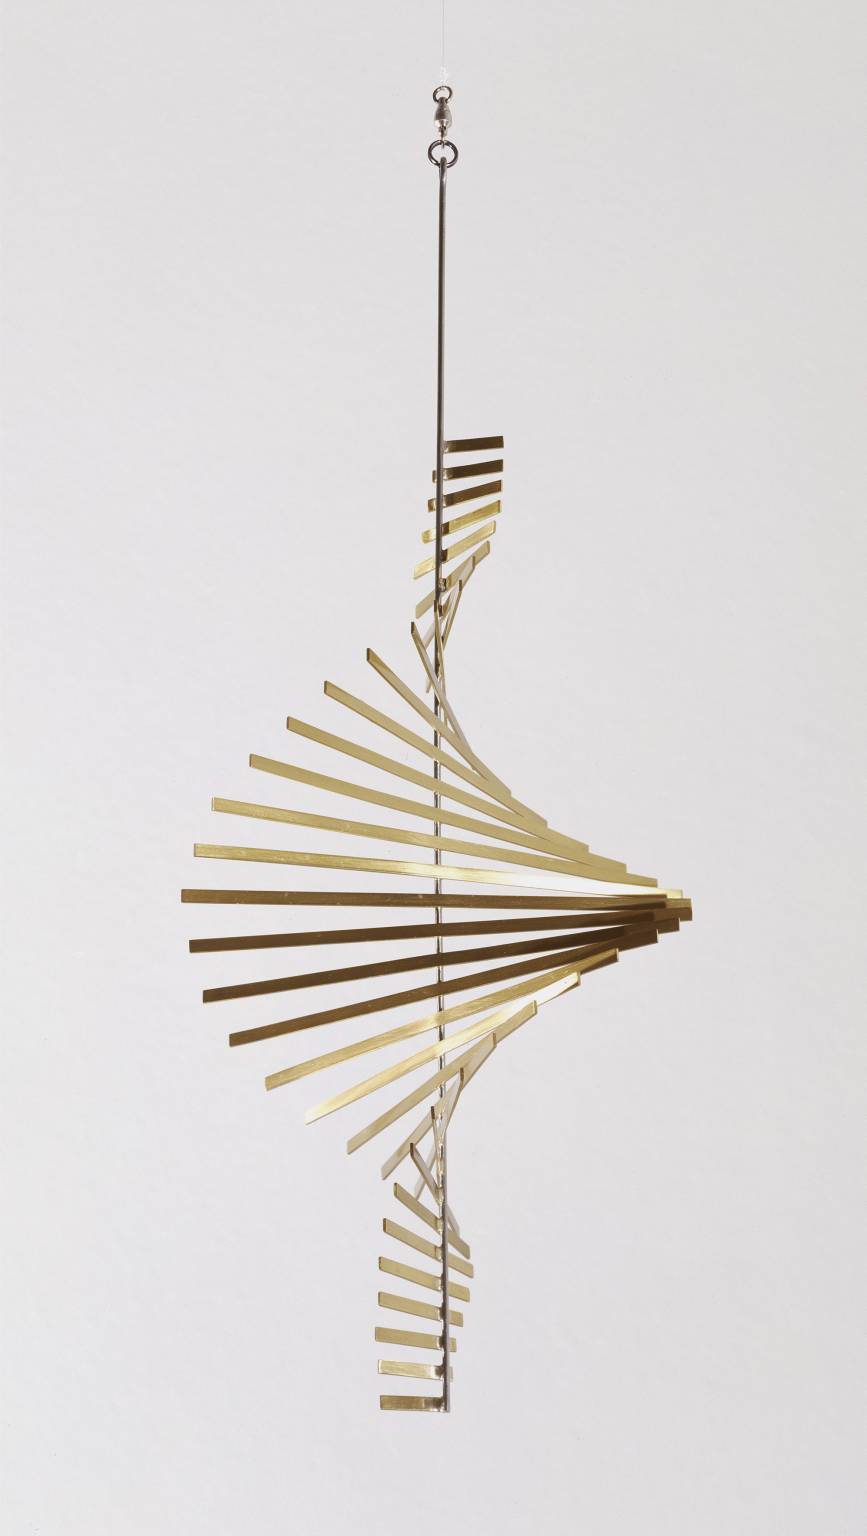 Small Screw Mobile 1953 by Kenneth Martin 1905-1984